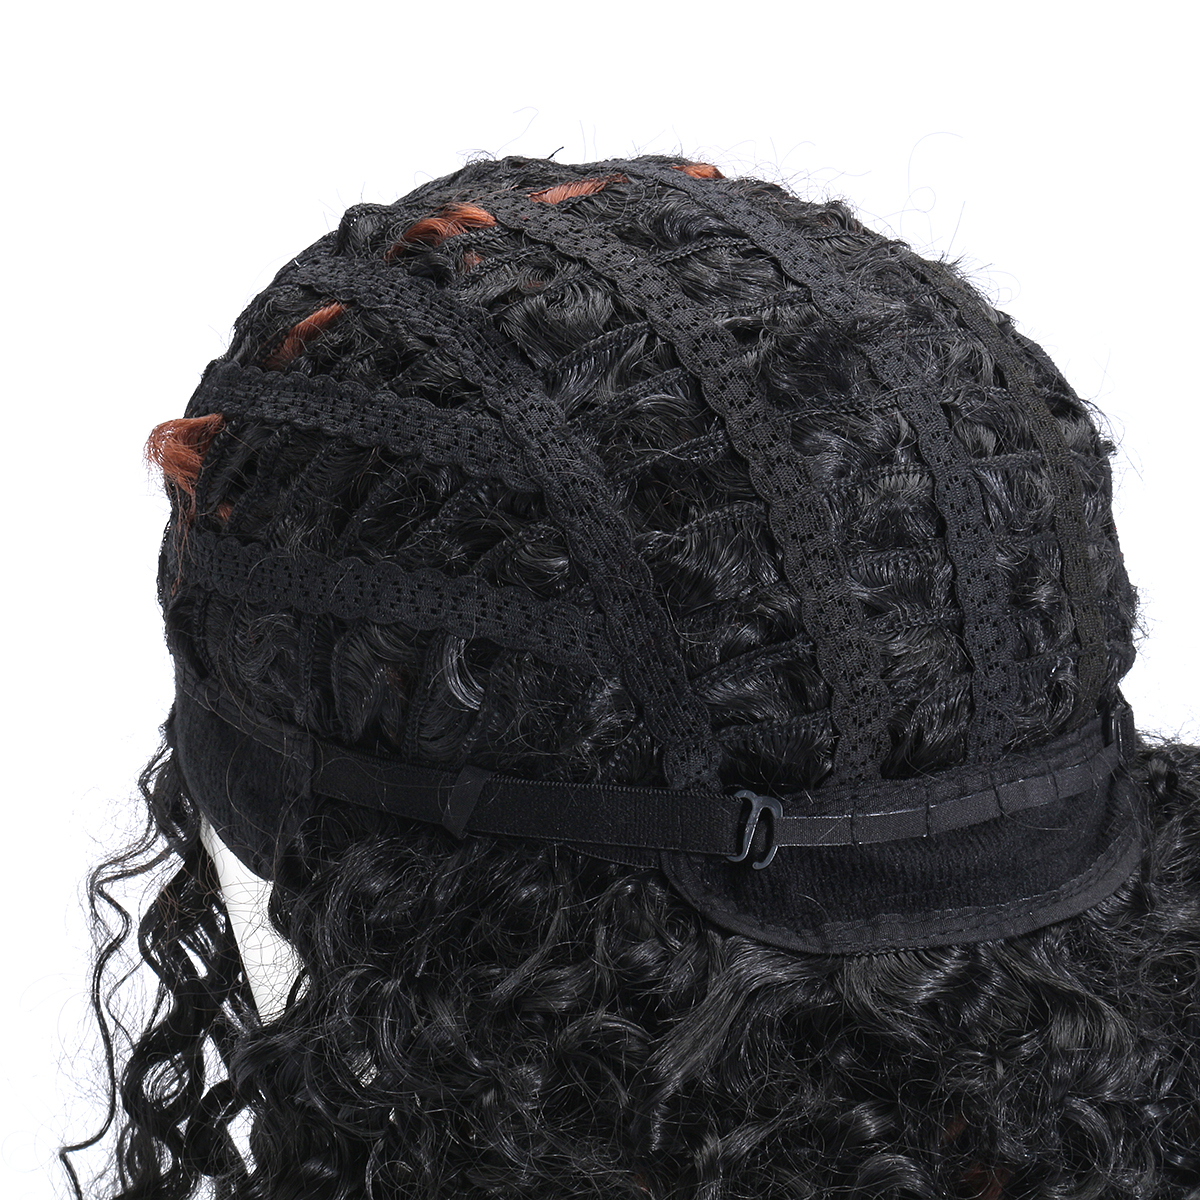 Brazilian-Black-Brown-Hair-Deep-Wavy-Curly-Lace-Front-Full-Wig-1230999